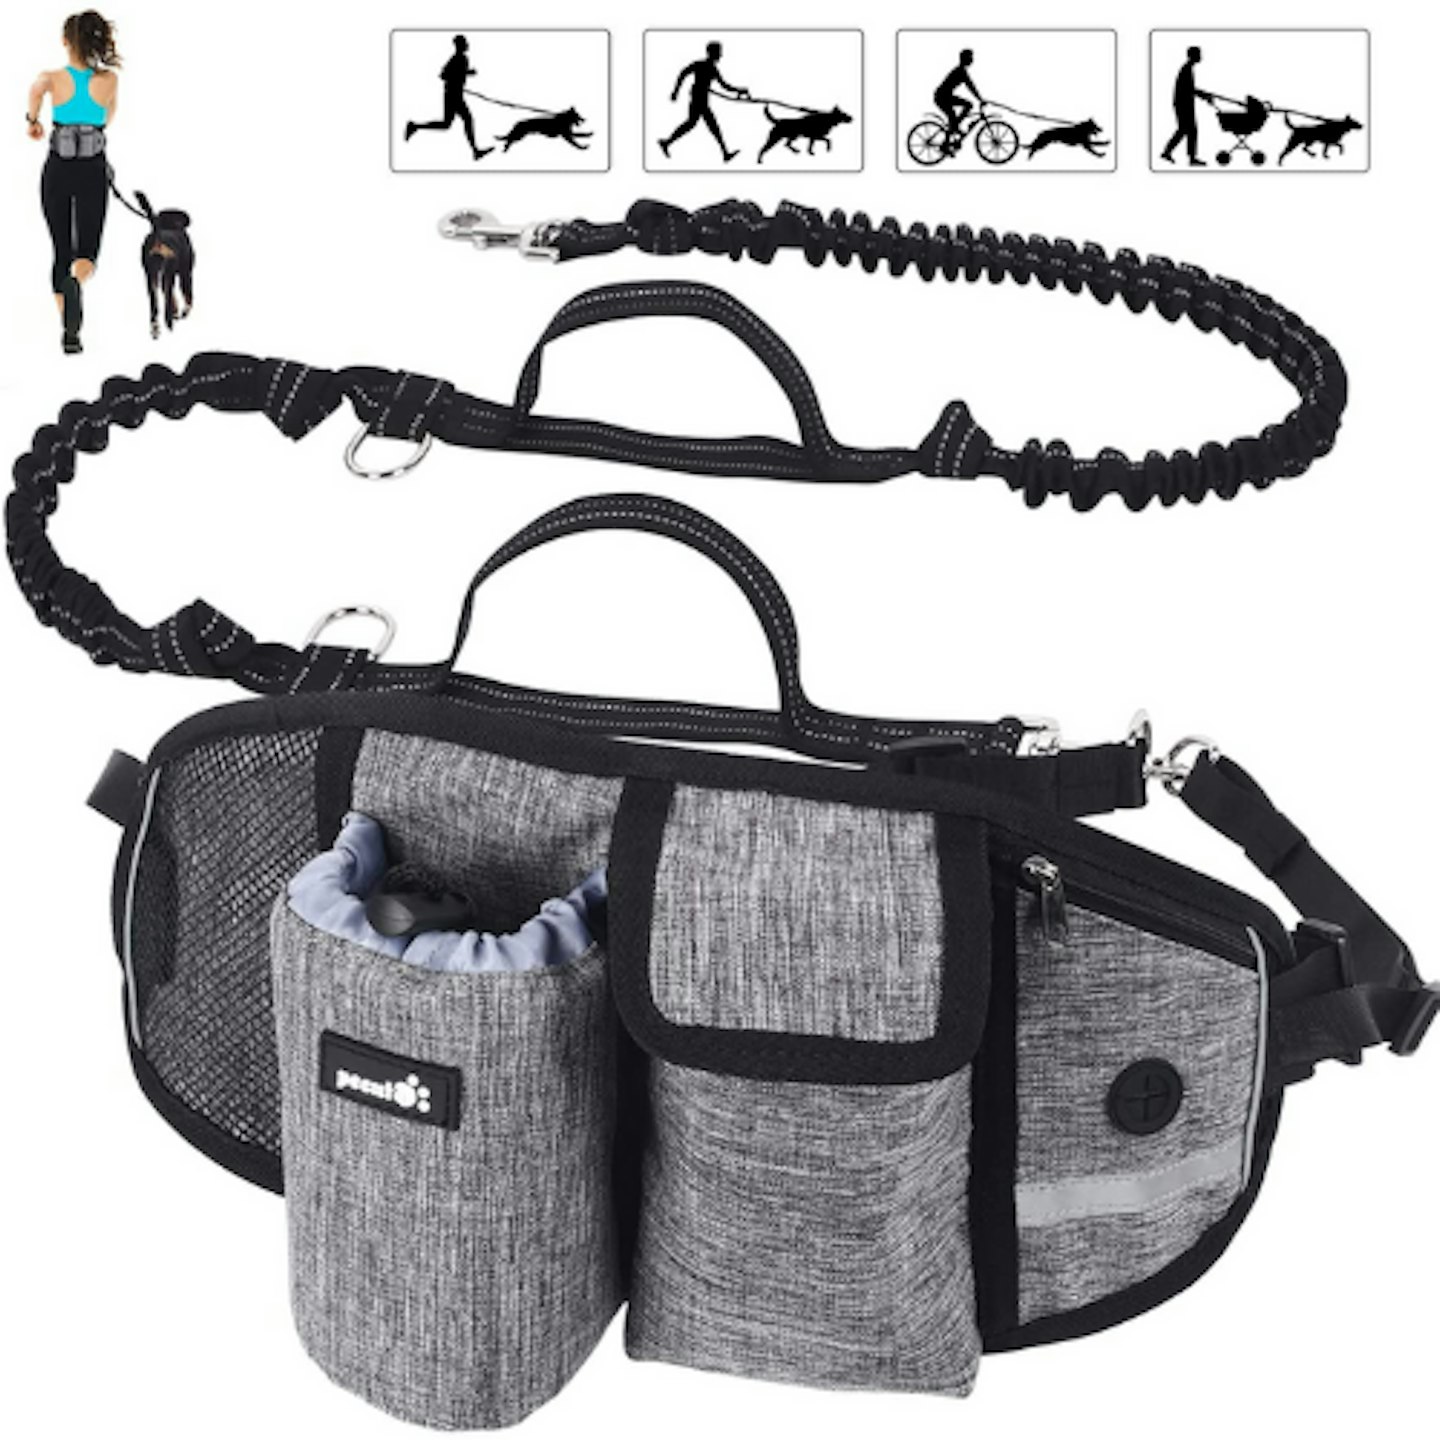 Pecute Hands Free Dog Running Lead with Wide Back Support Waist Bag